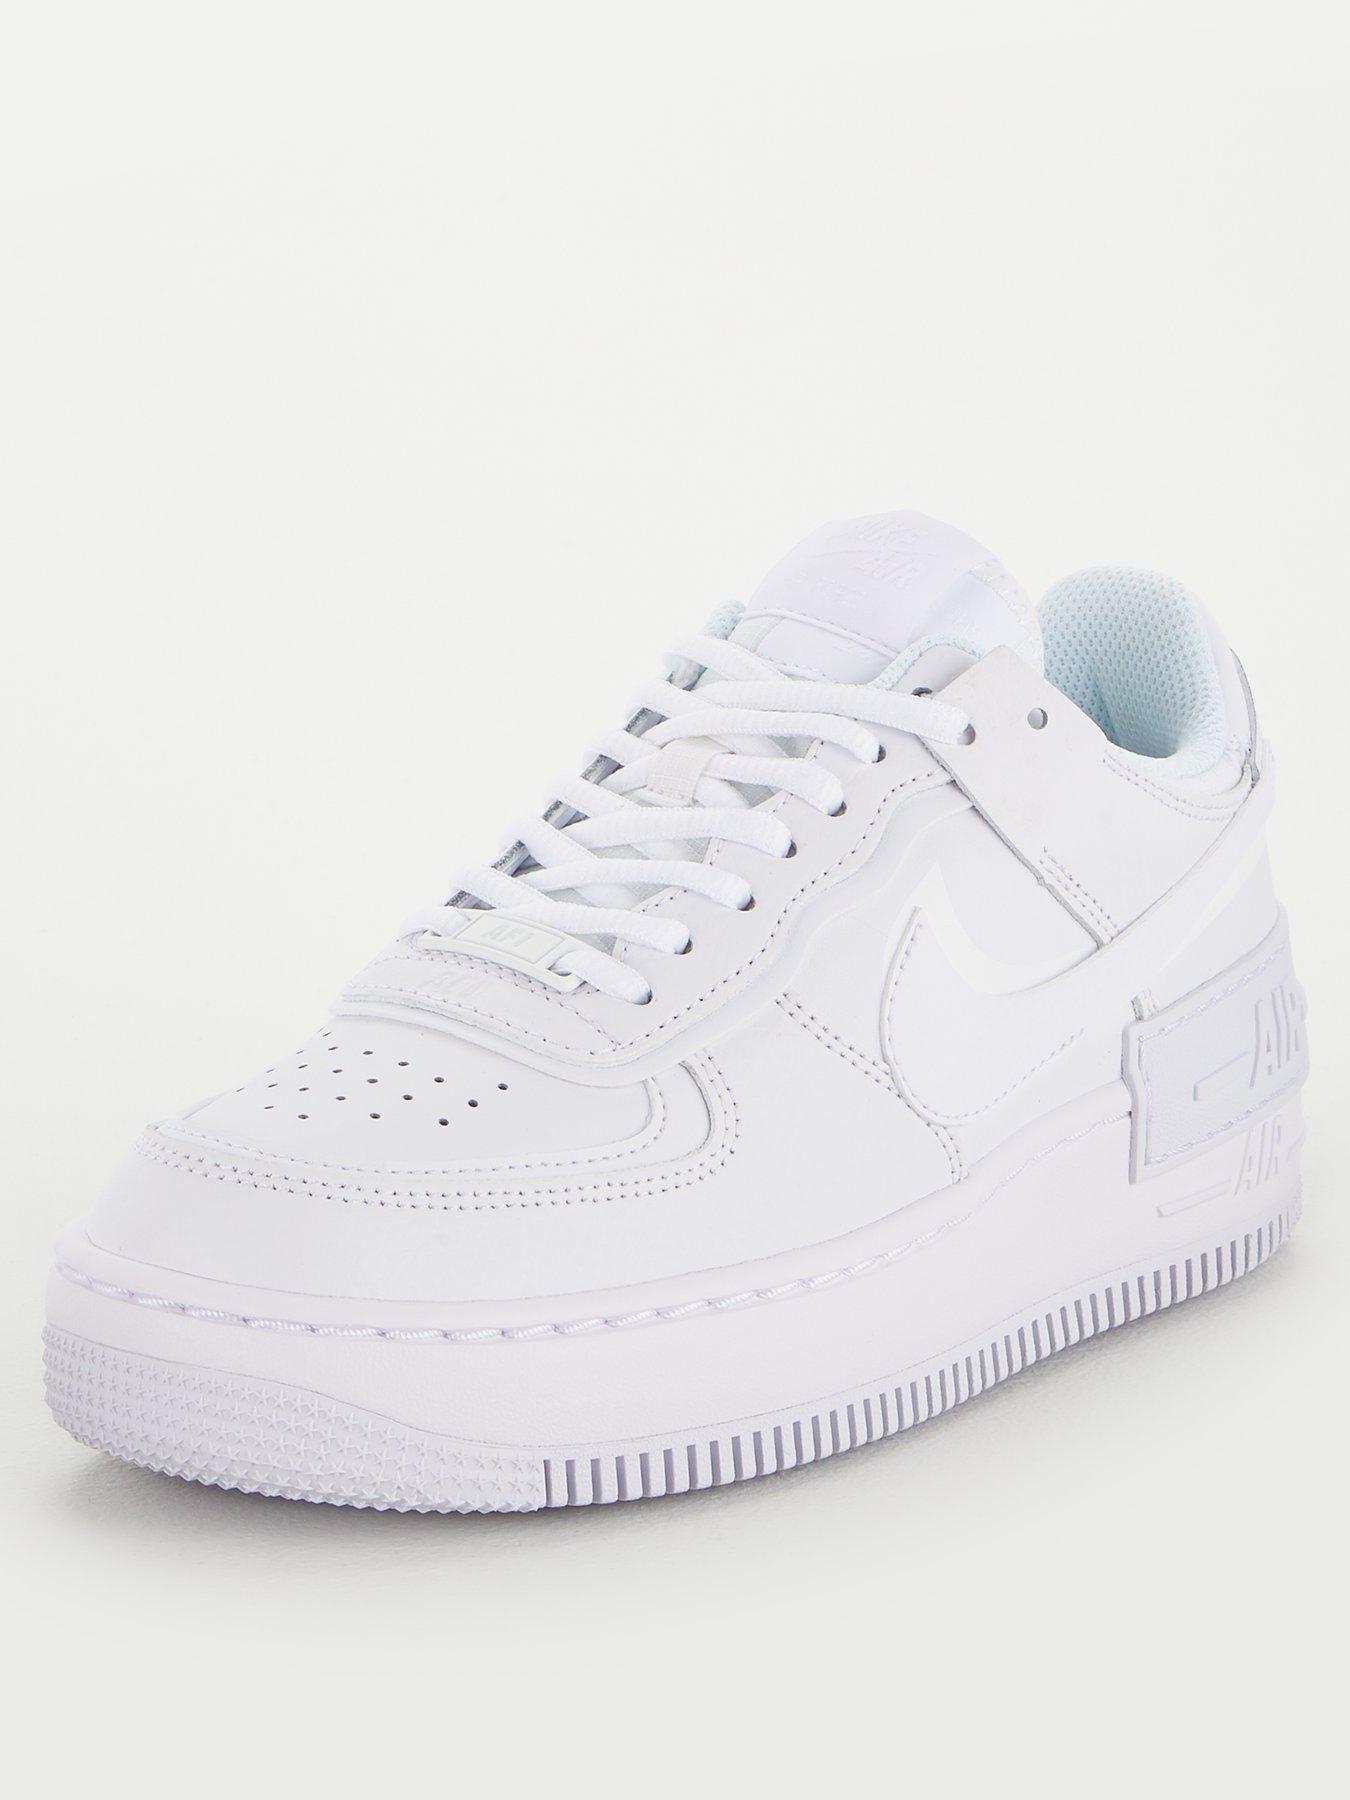 nike air force 1 shadow white size 8